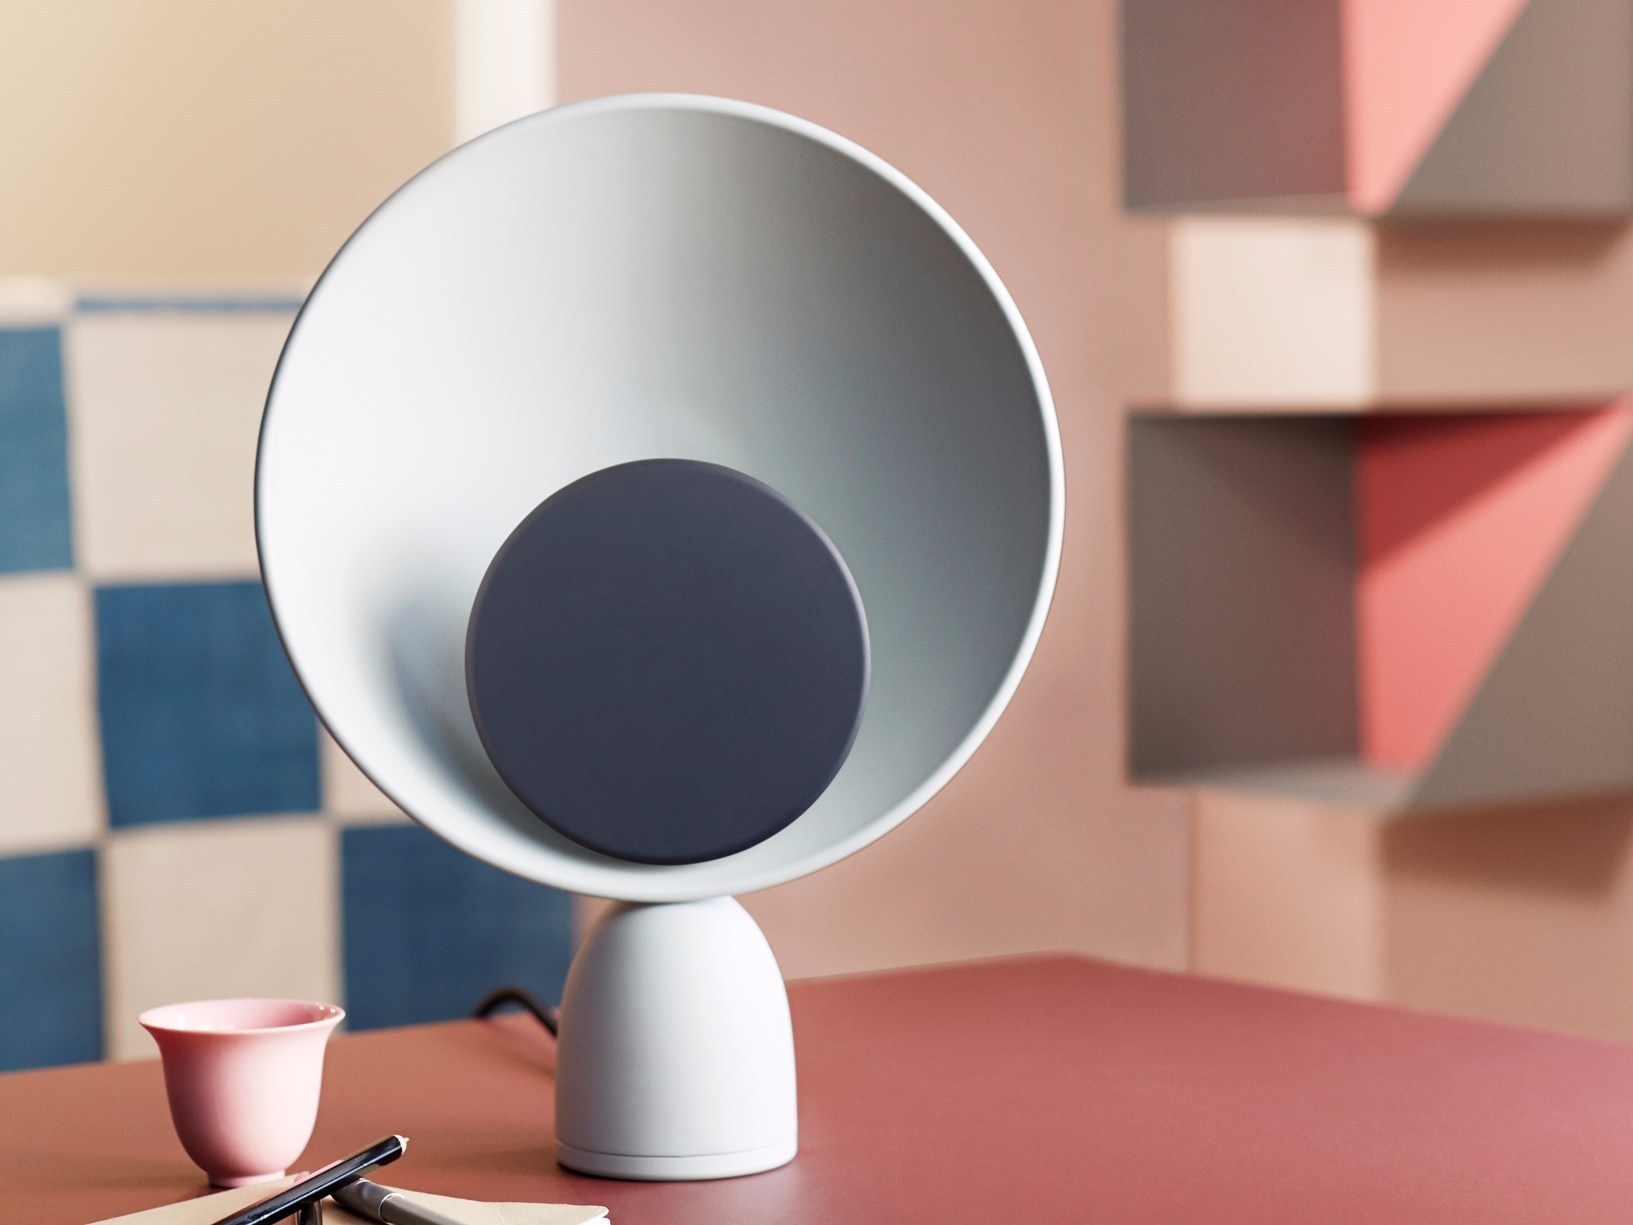 Blooper Table Lamp by Mette Schelde for PLEASE WAIT to be SEATED